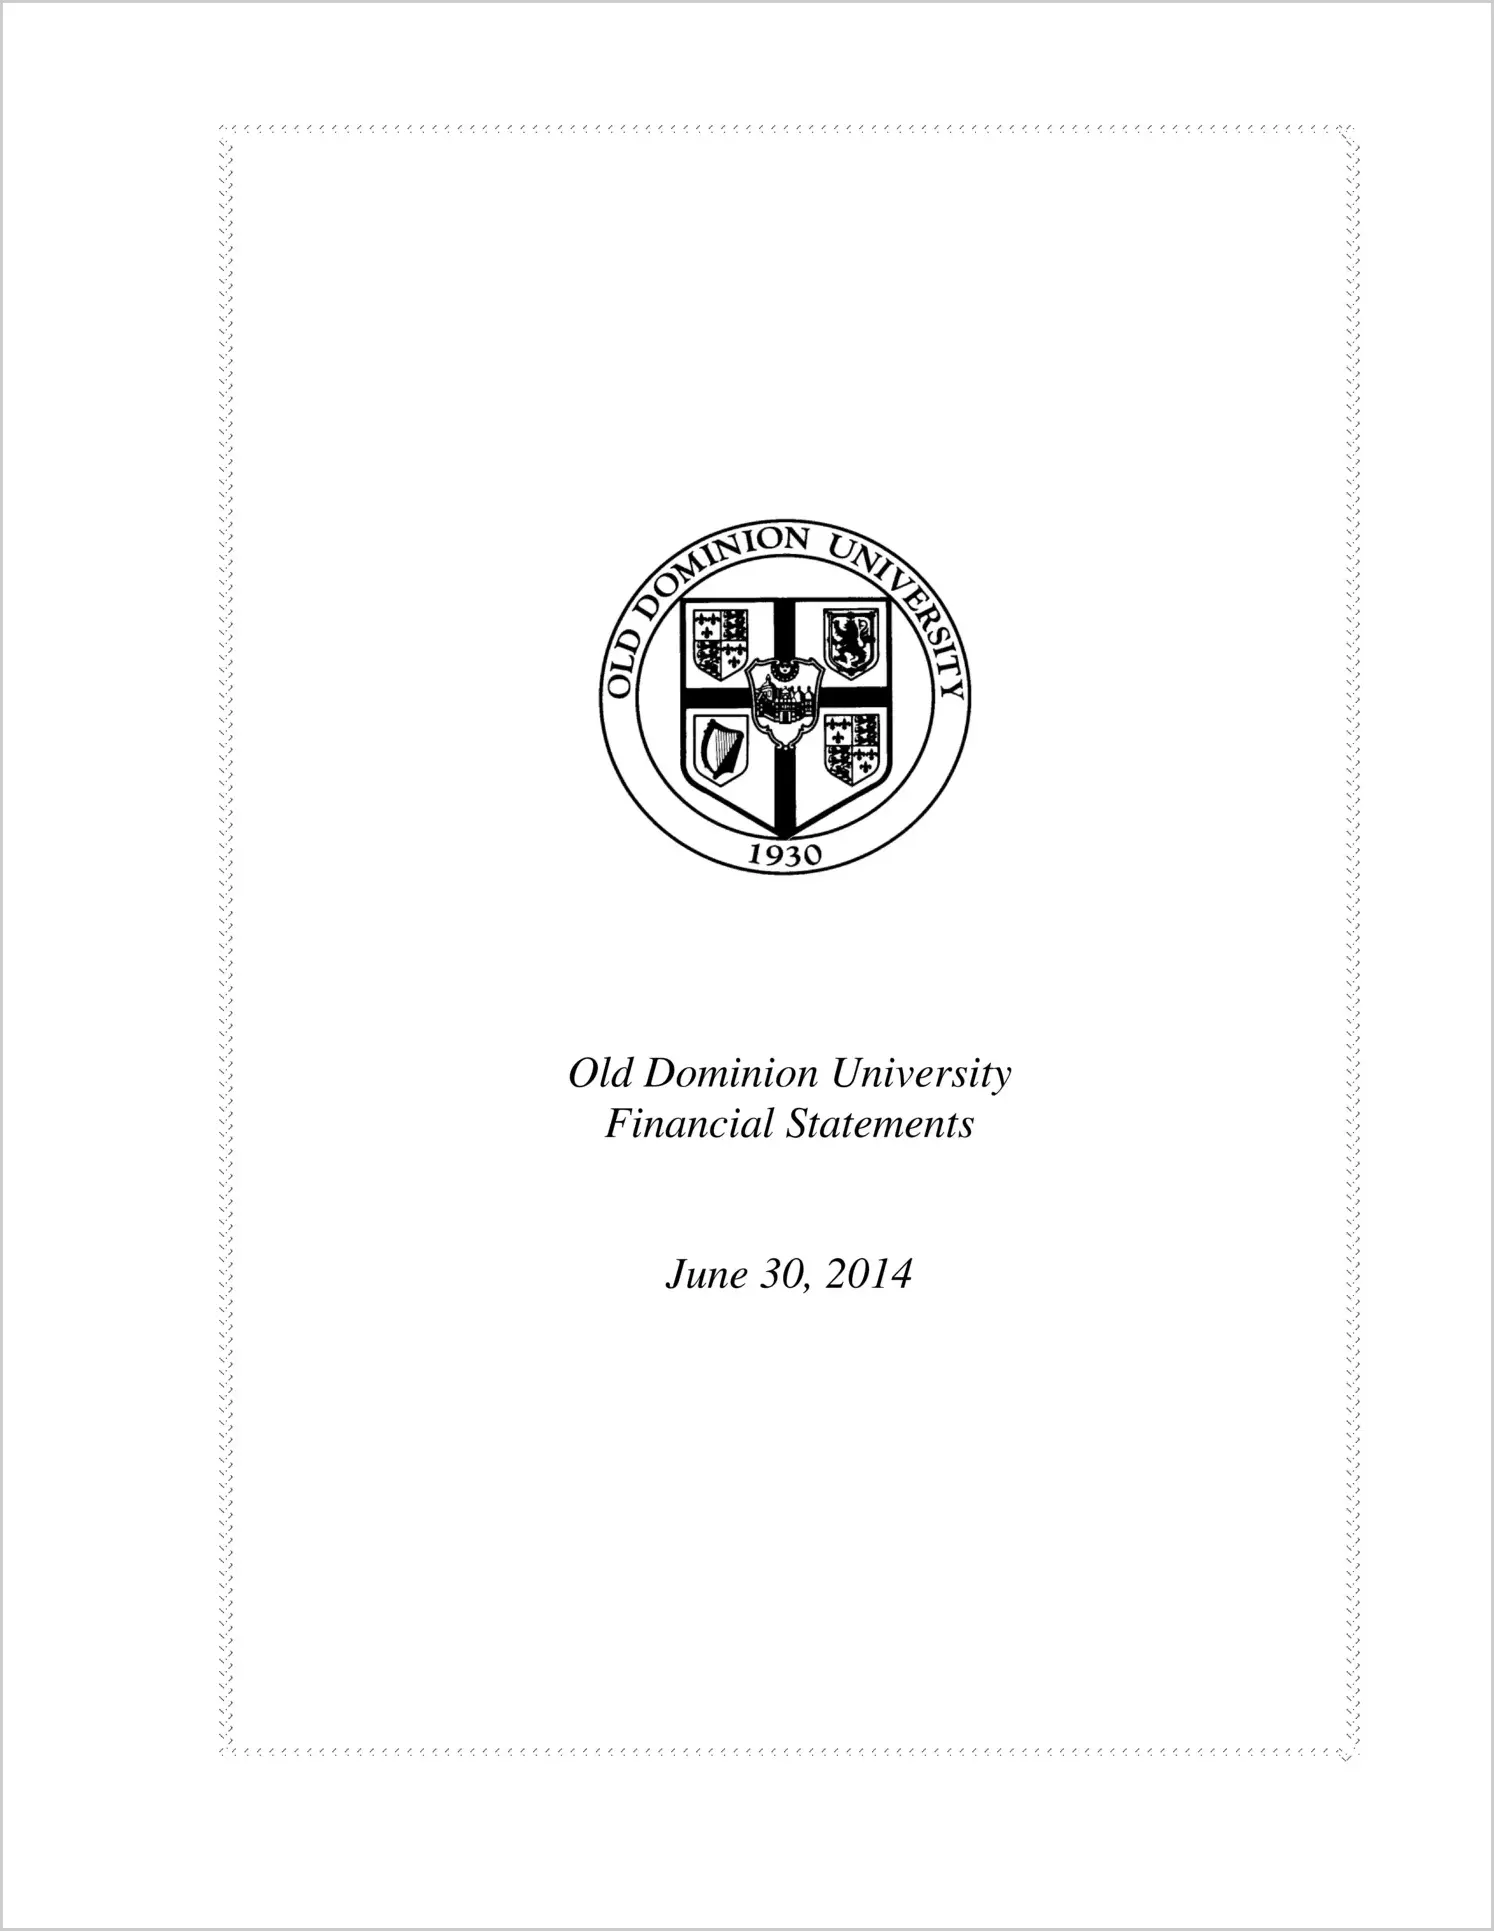 Old Dominion University Financial Statements for the year ended June 30, 2014